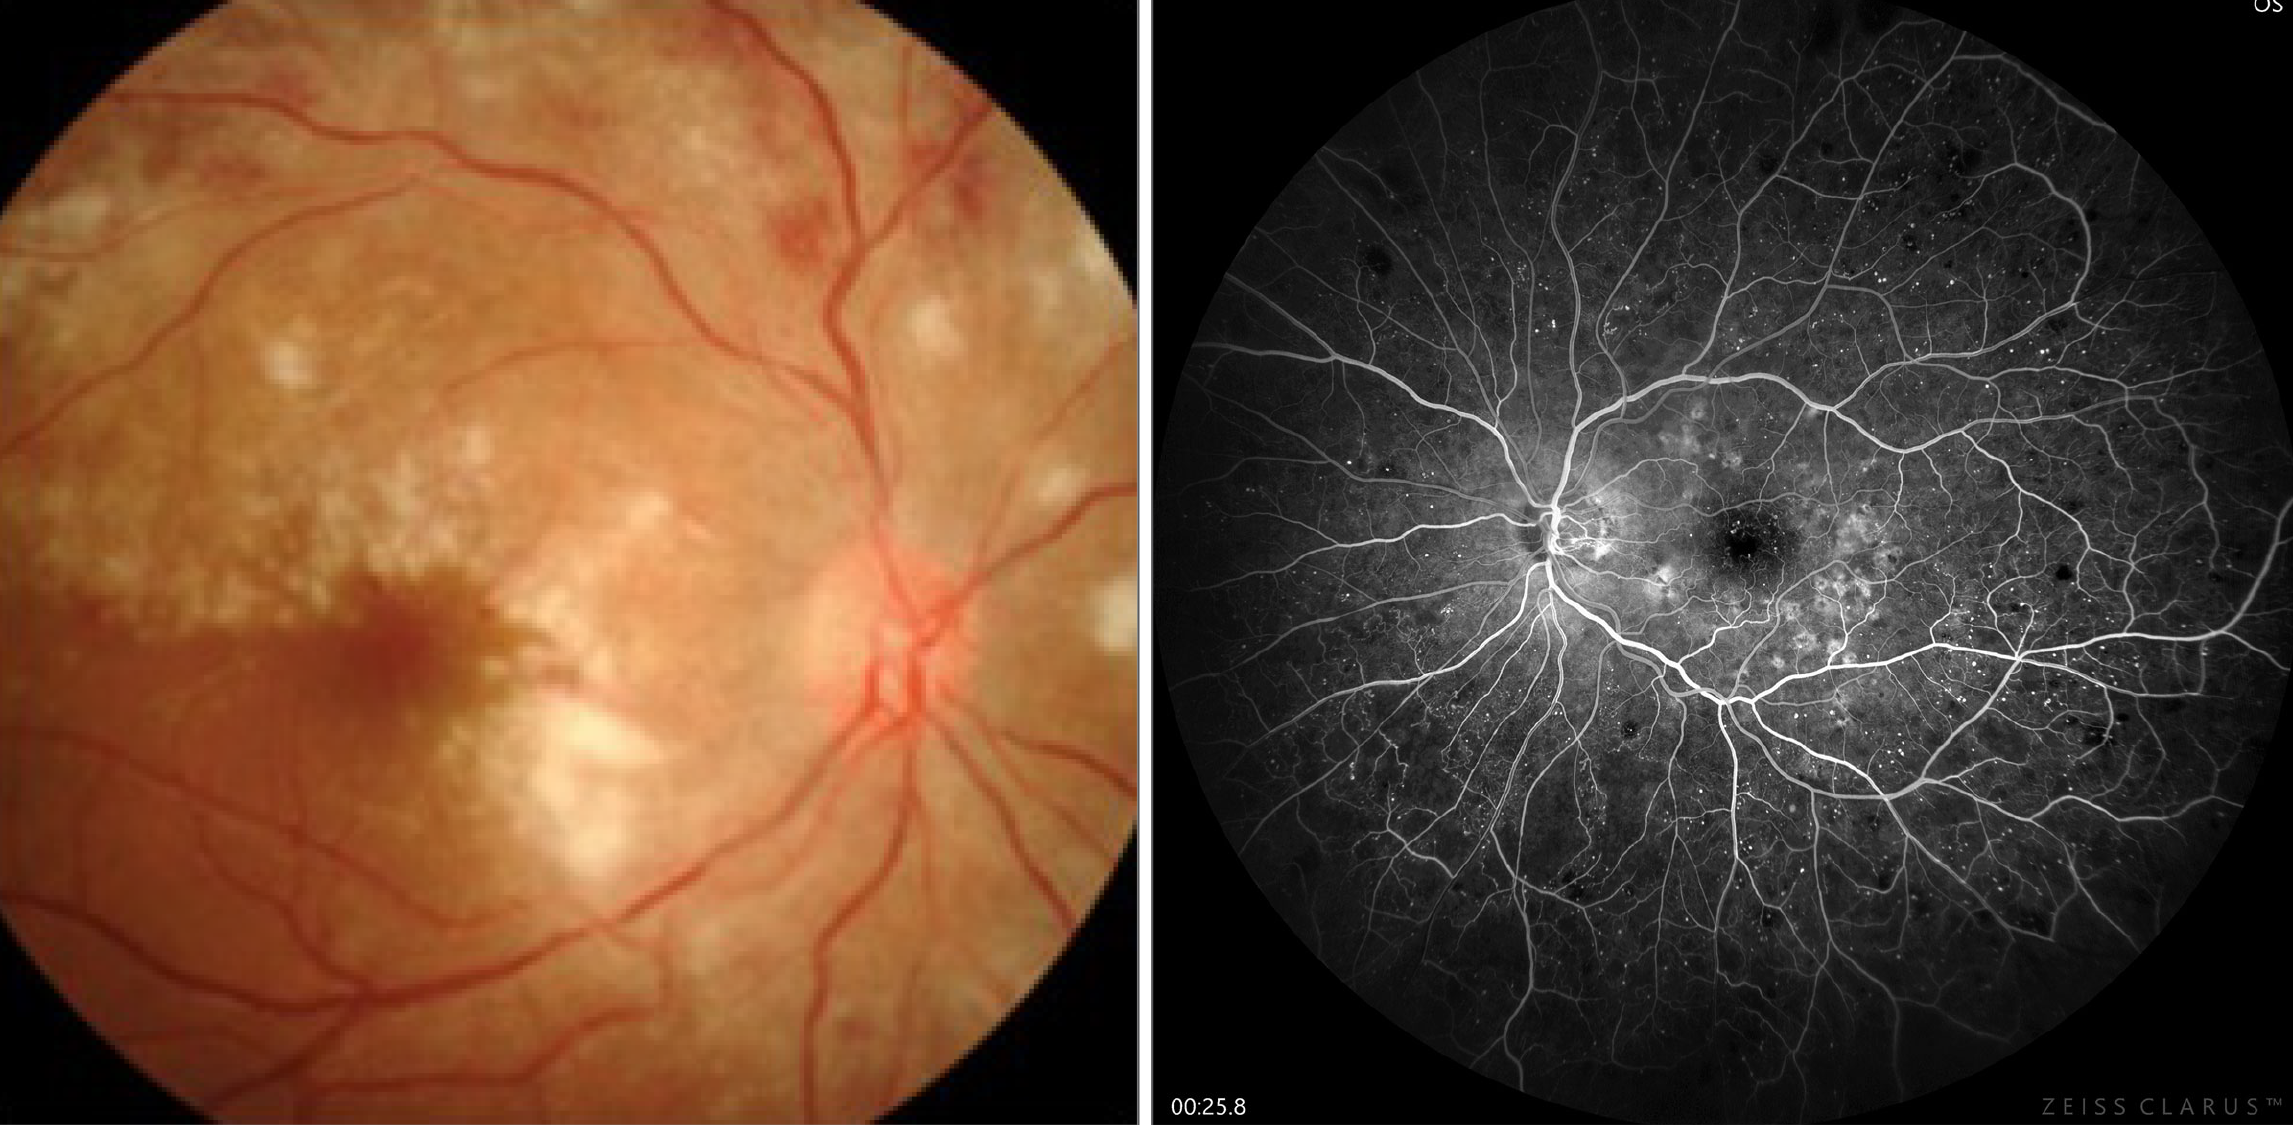 Intermediate uveitis has been linked to an earlier onset of posterior vitreous detachment, which prevents the further progression of DR into proliferative stages.